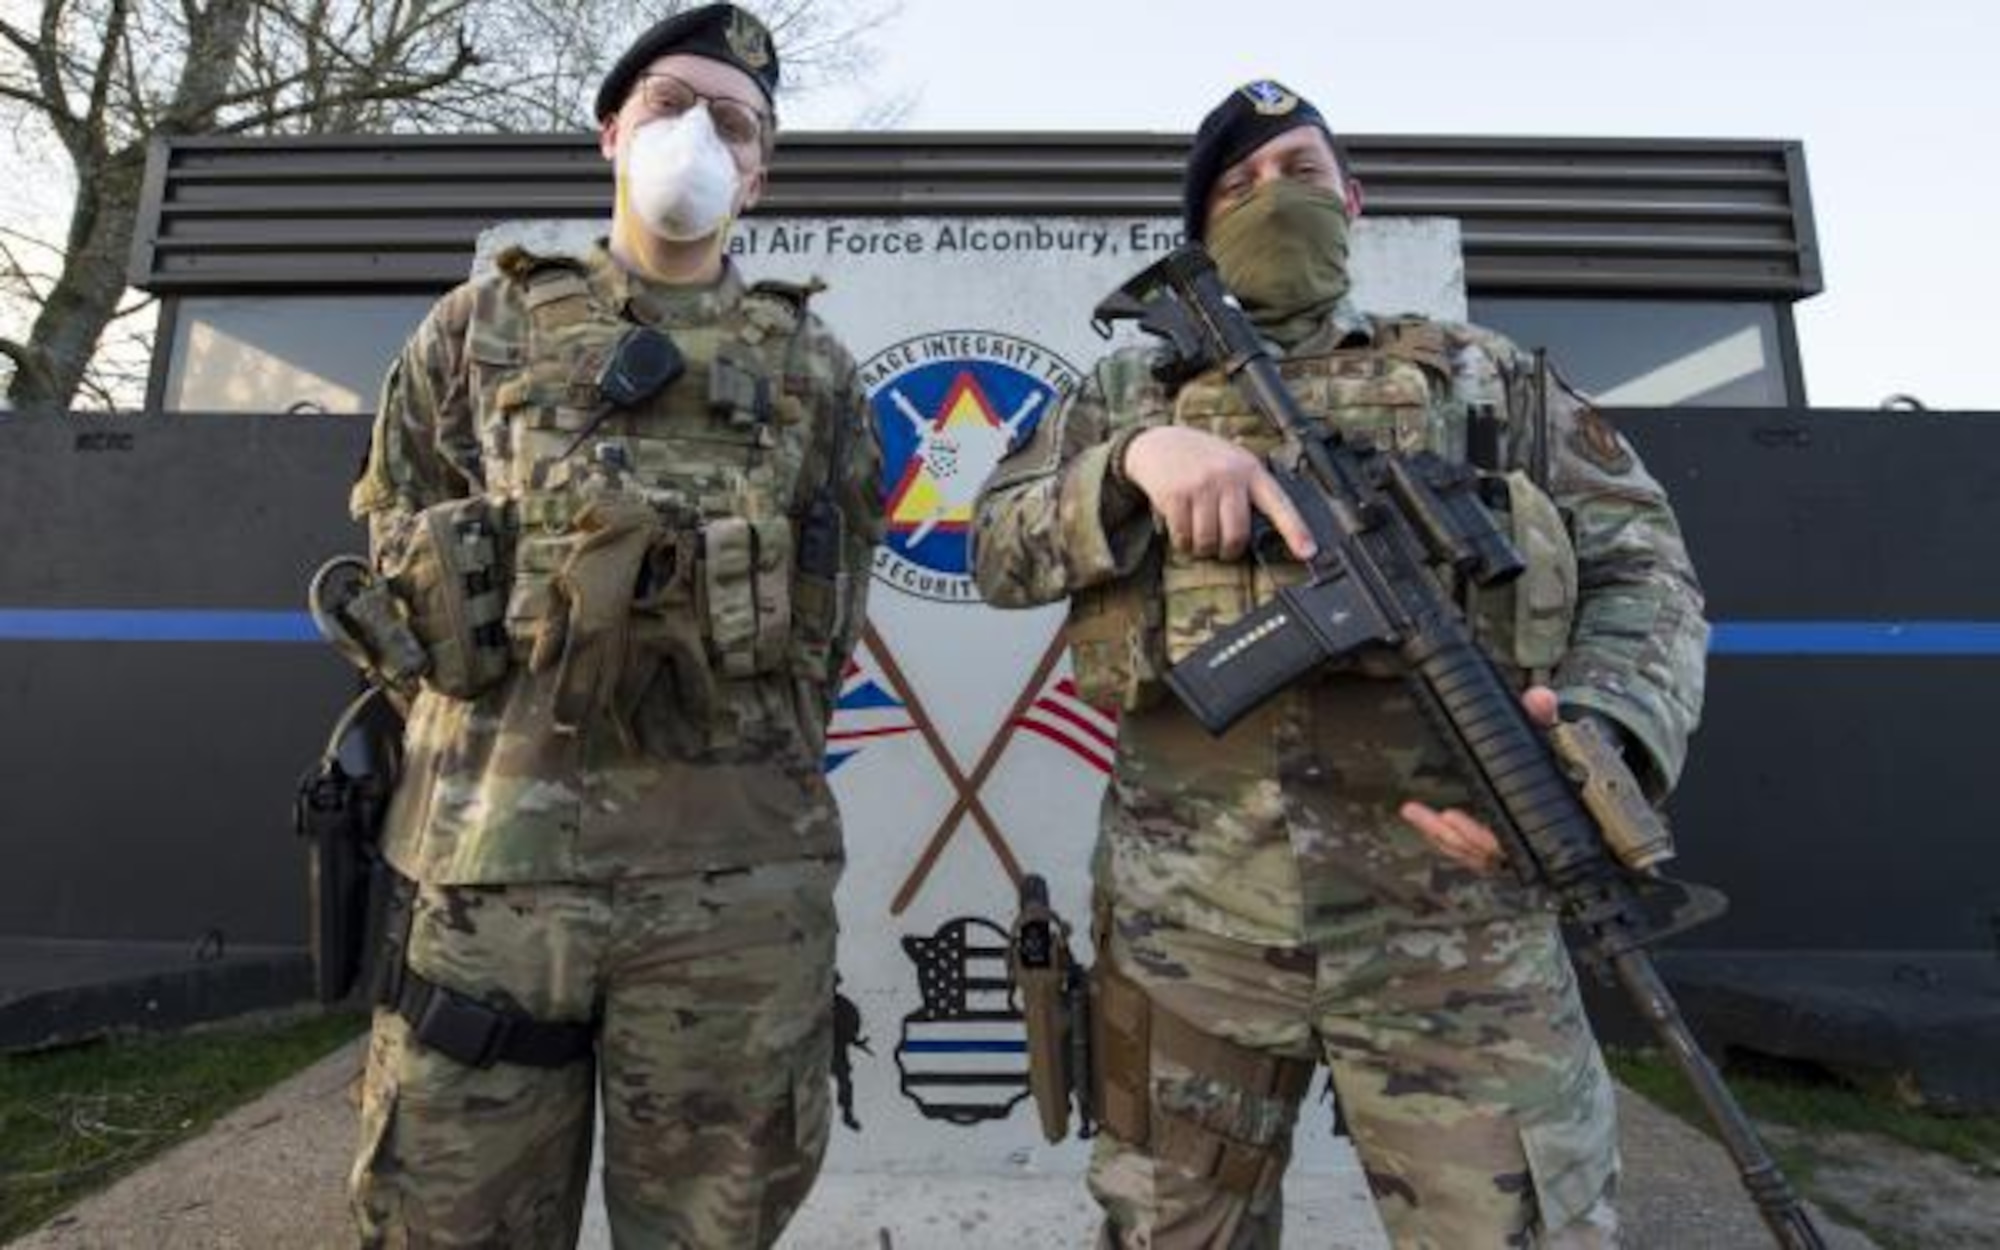 U.S. Air Force Security Forces Airmen at Royal Air Force Alconbury, England wear CDC-recommended PPE to train. (U.S. Air Force Courtesy photo.